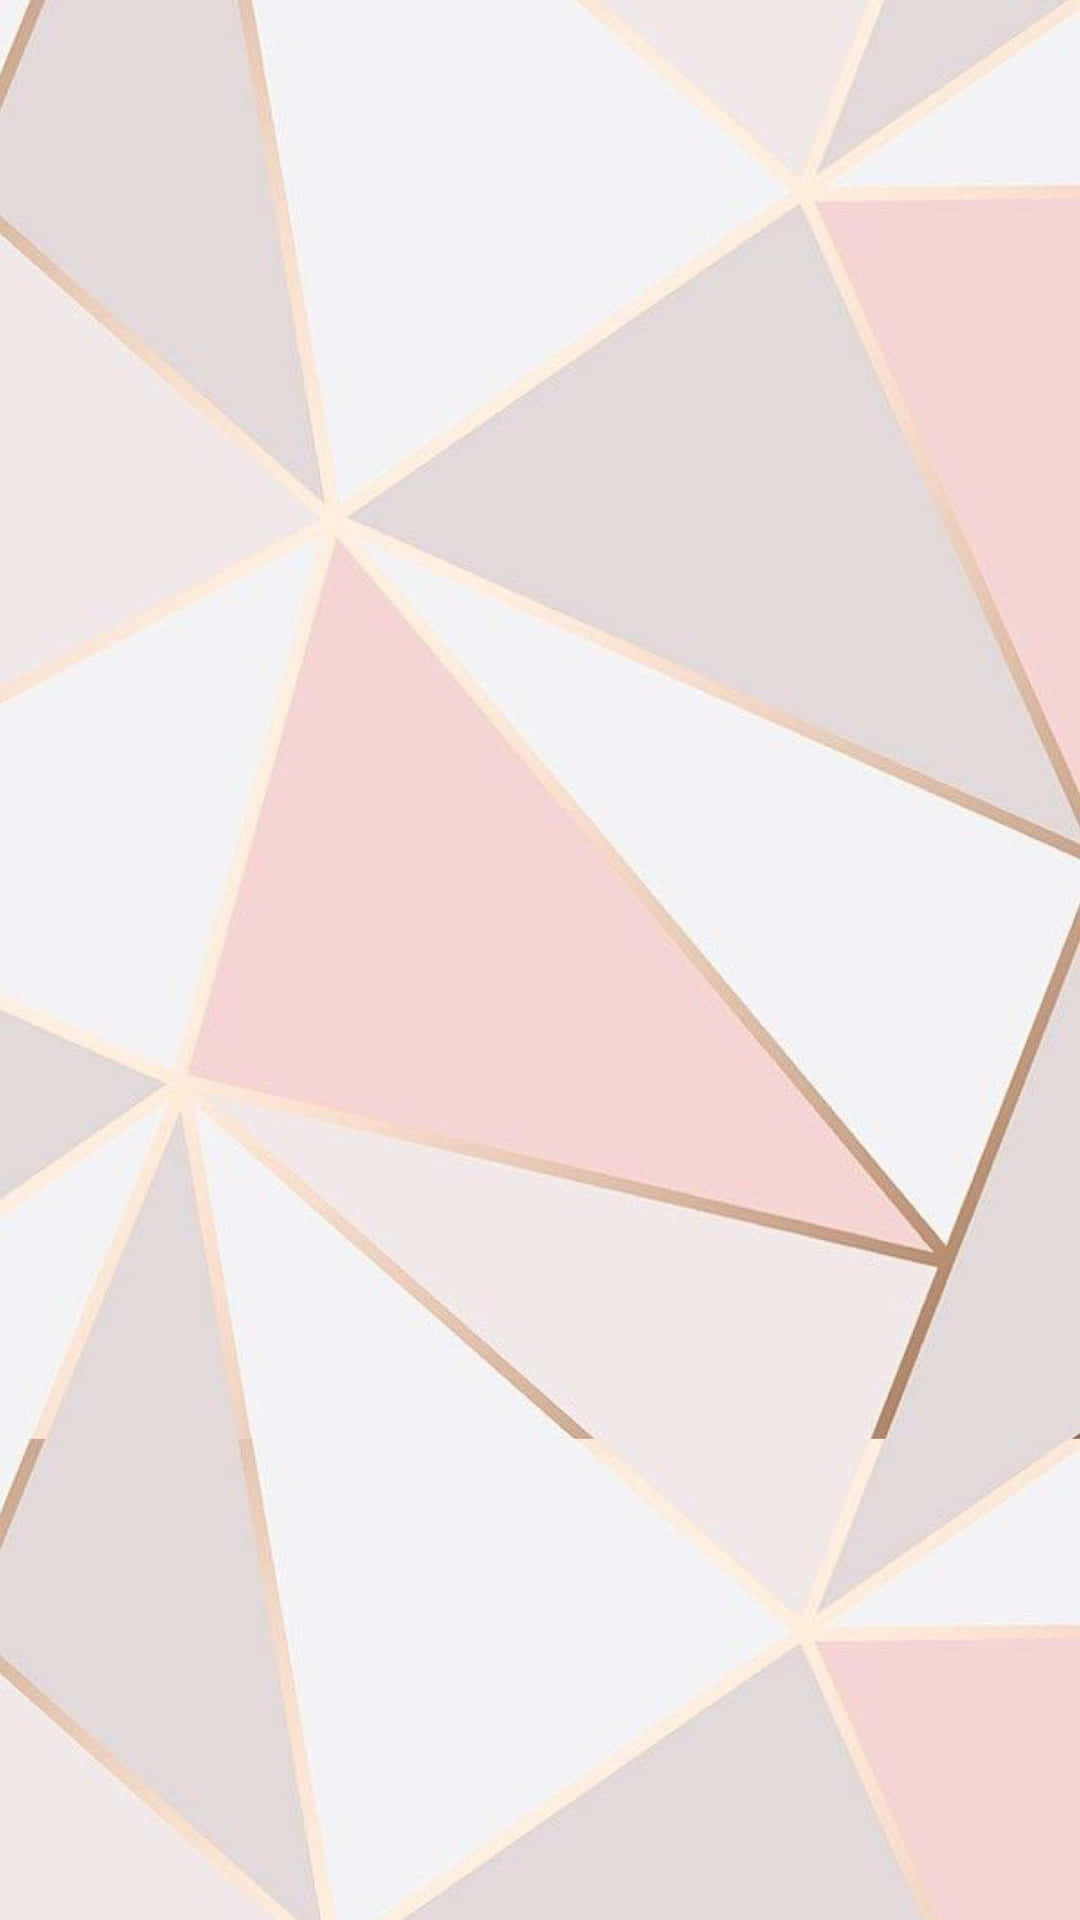 Einfachespink Lila Muster Iphone Wallpaper